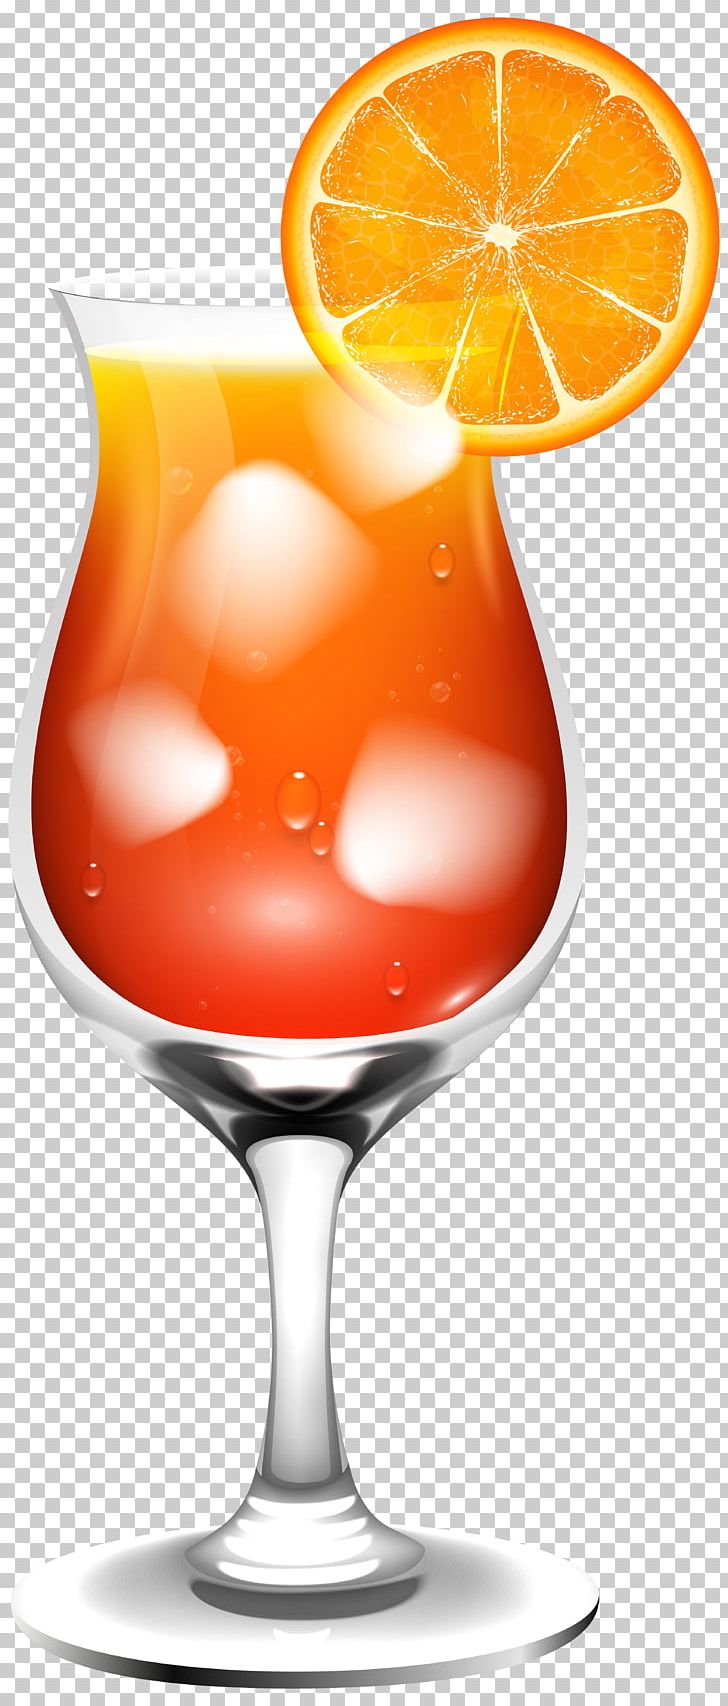 Cocktail Juice Martini Punch PNG, Clipart, Clip Art, Clipart, Cocktail, Cocktail Garnish, Cocktail Party Free PNG Download